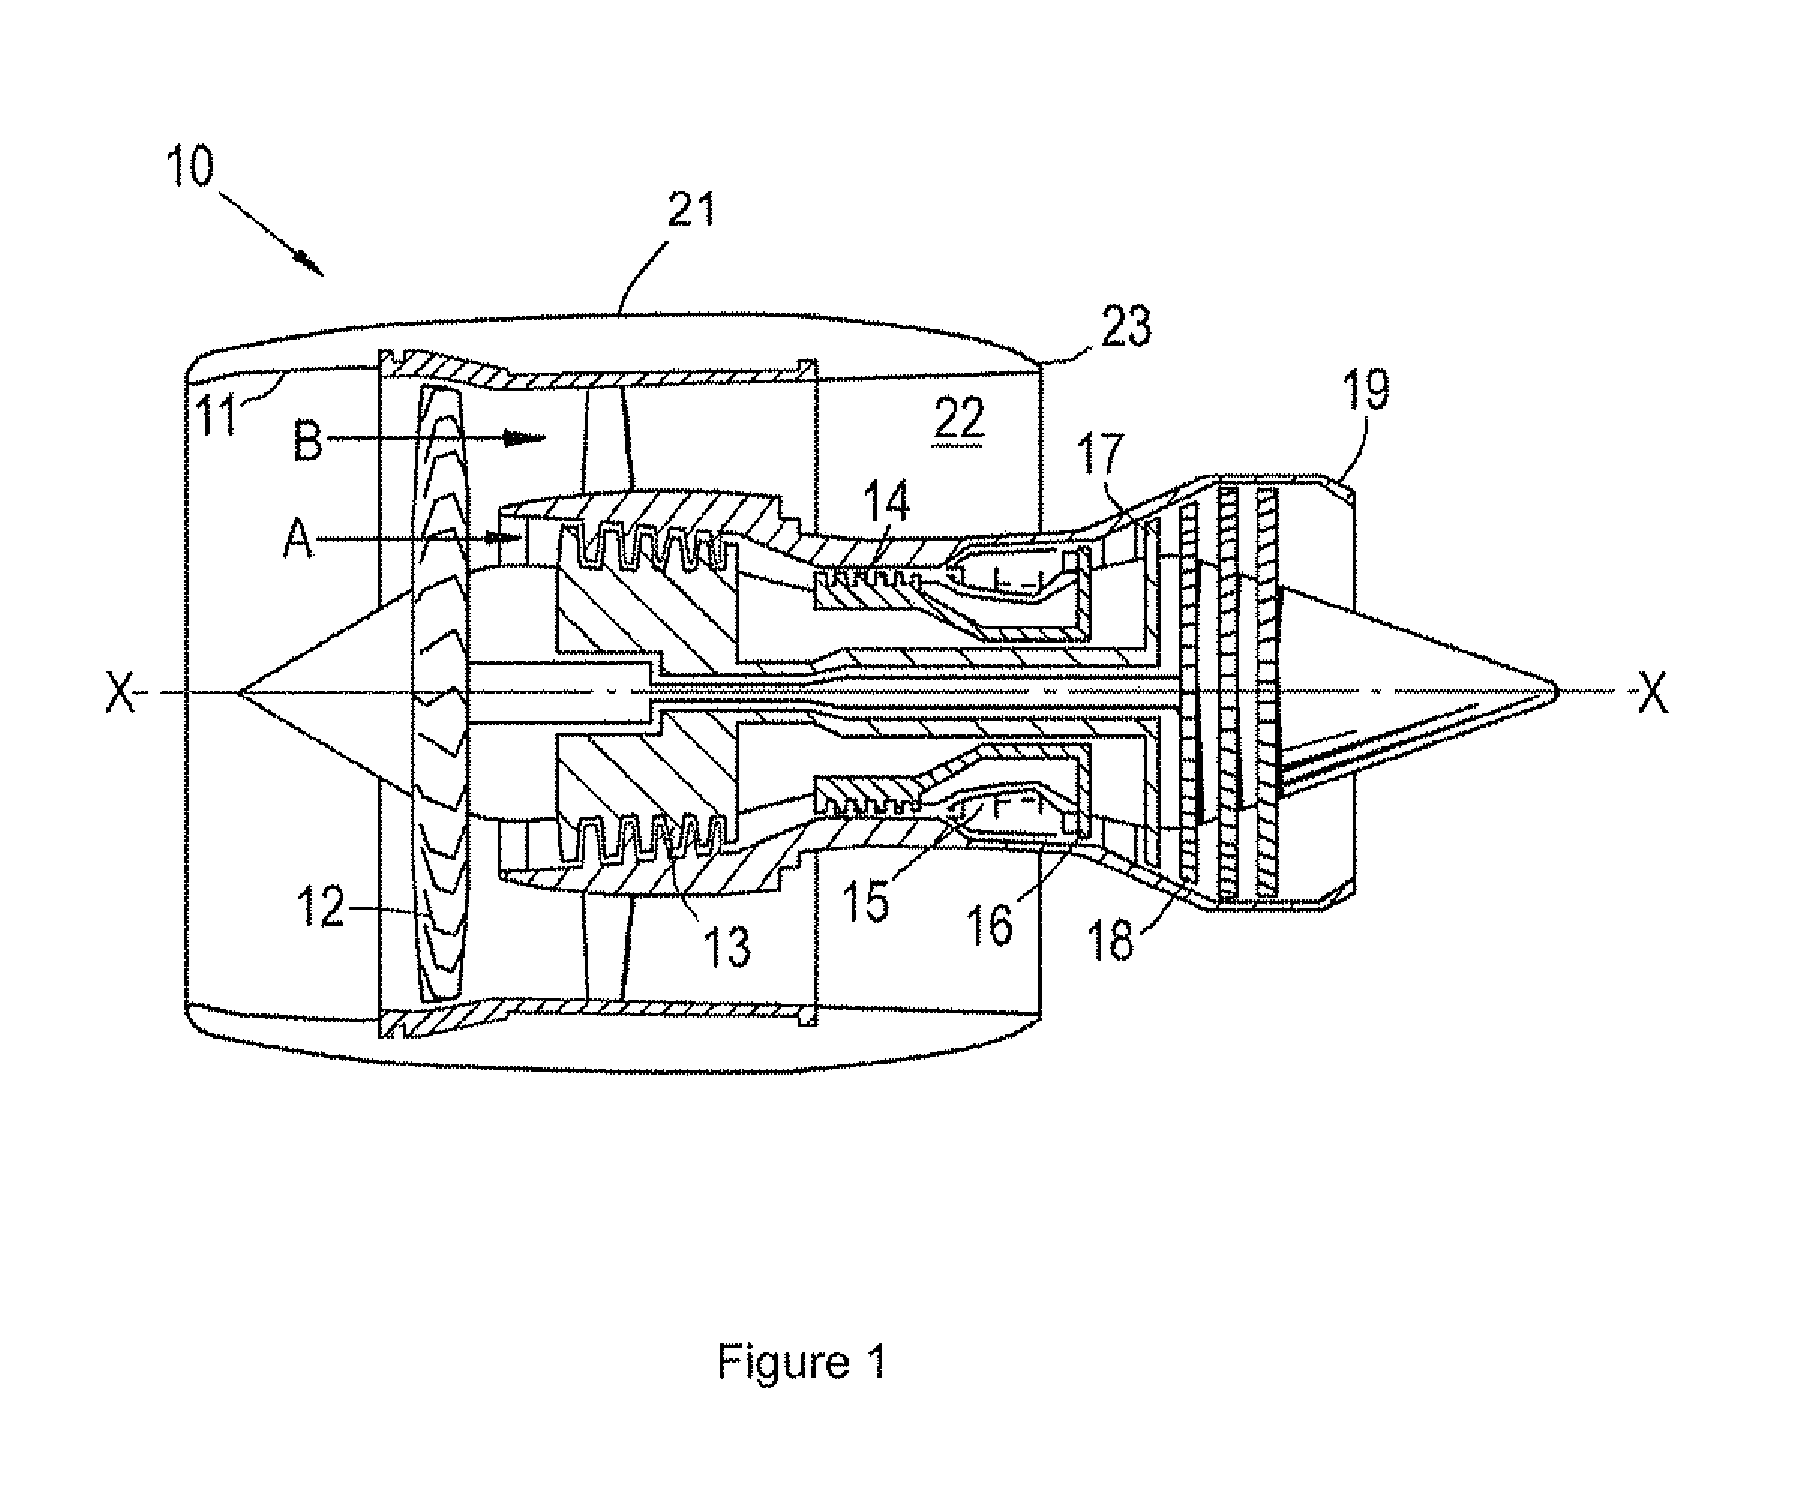 Effusion cooled shroud segment with an abradable system